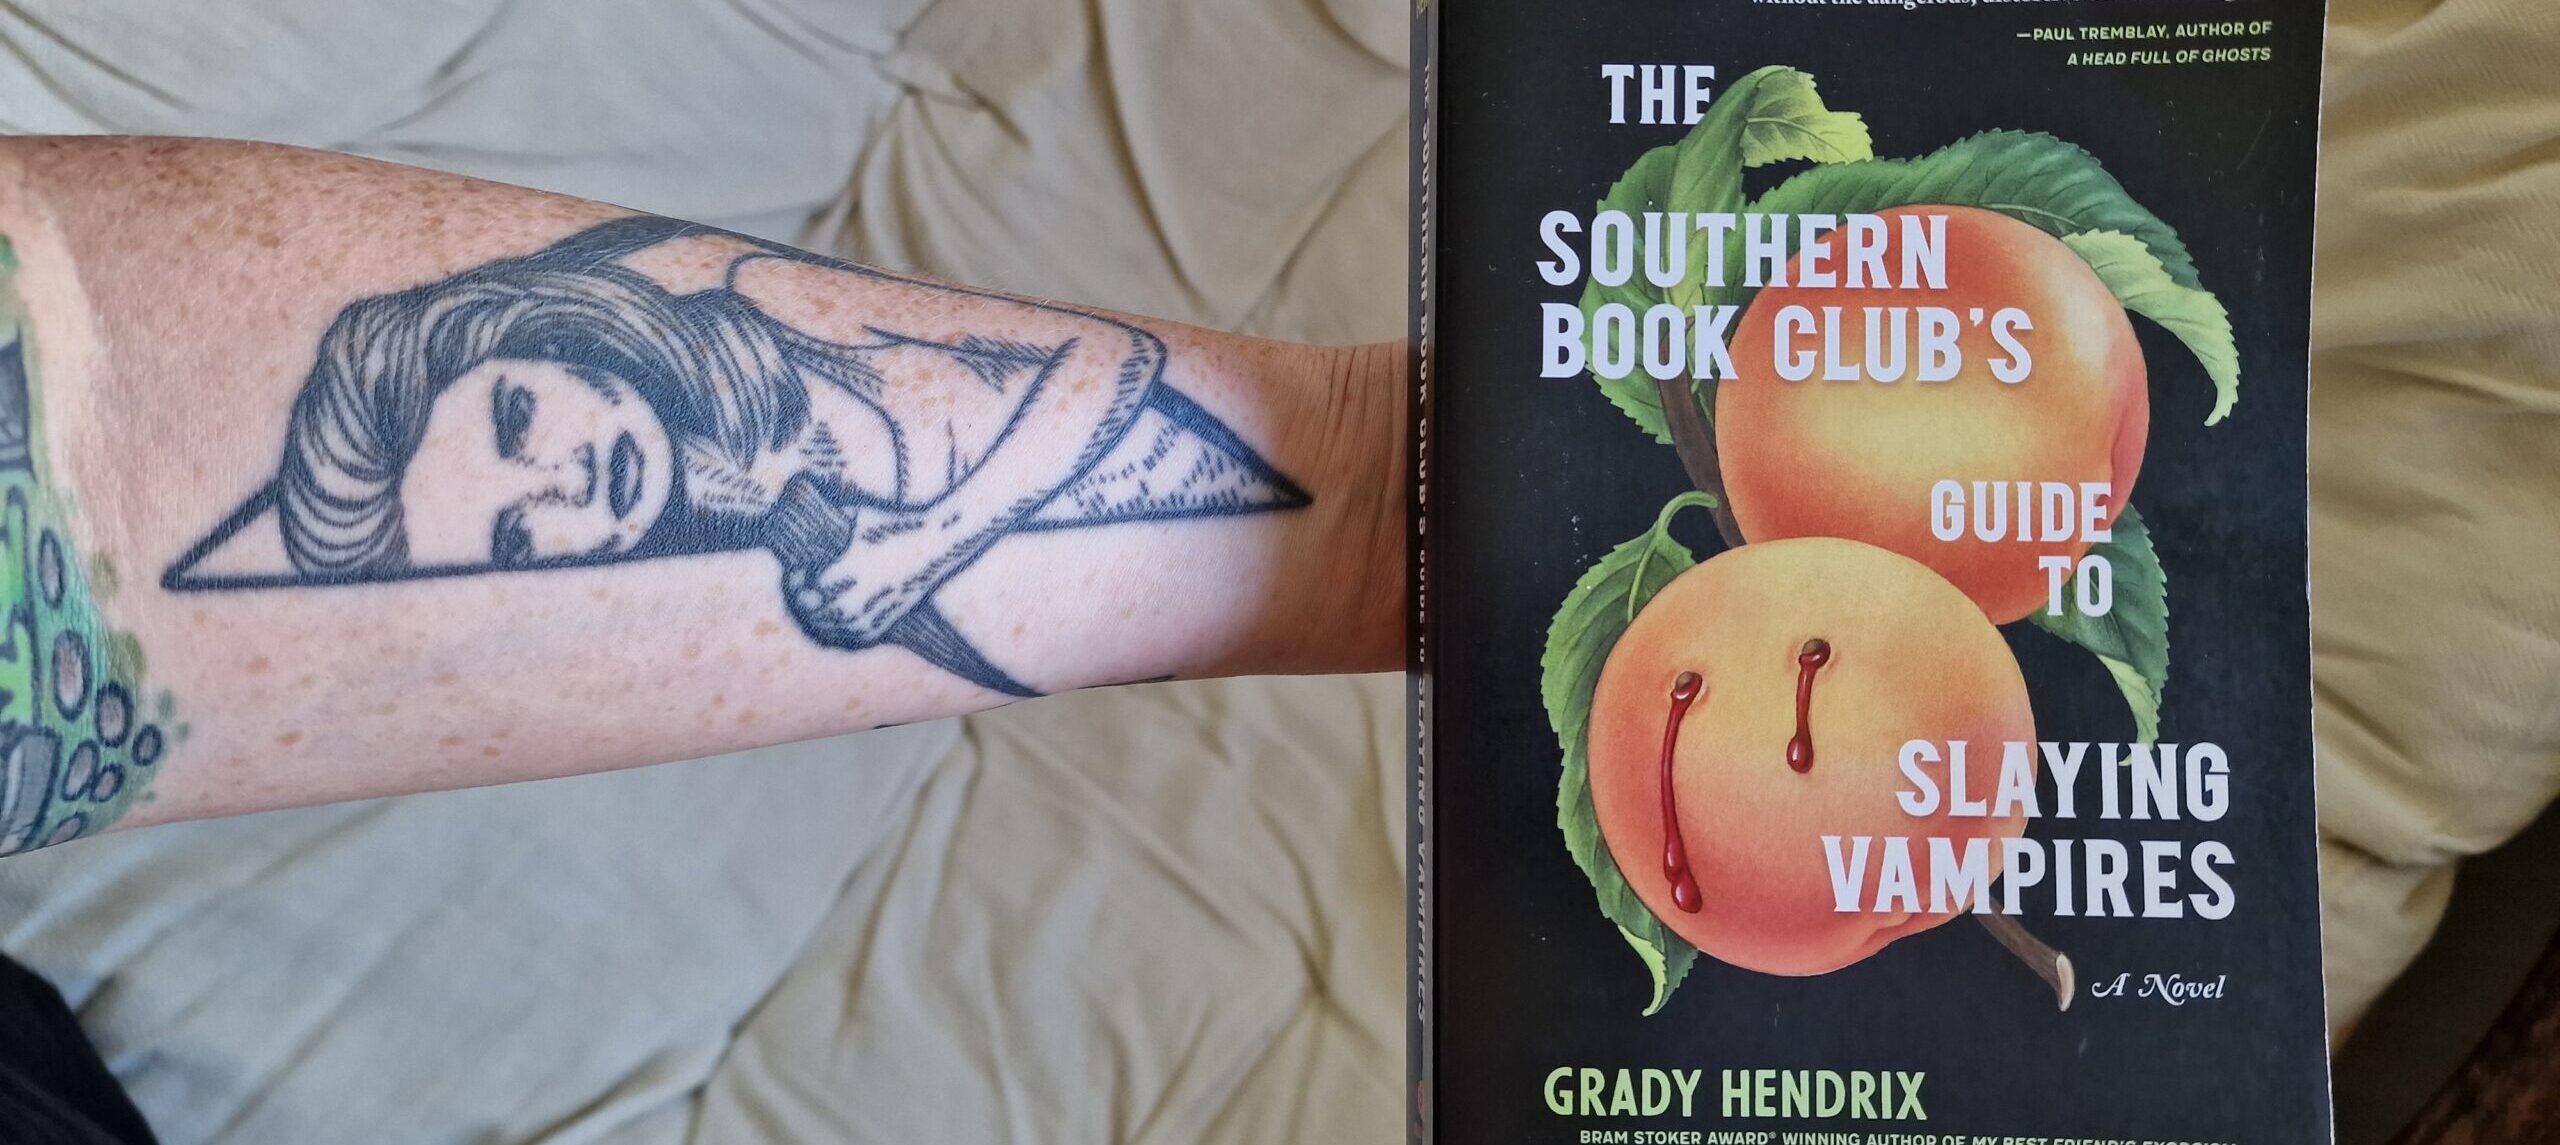 Recension: “The Southern Book Club’s Guide to Slaying Vampires” av Grady Hendrix